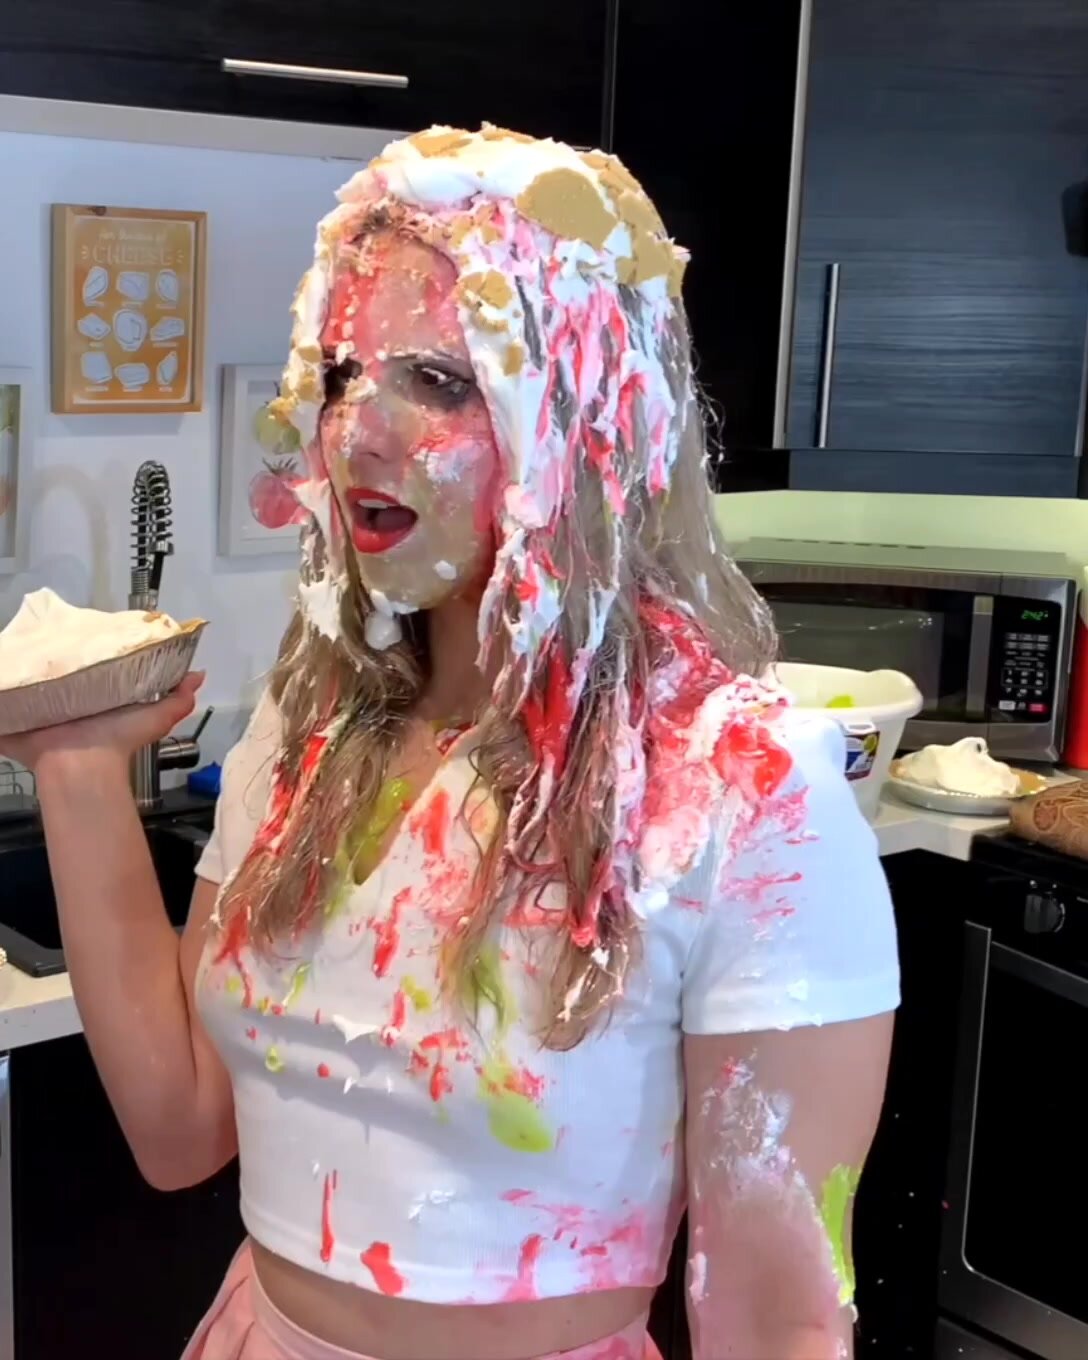 BLONDE GIRL GETS IN THE FACE IN A PIE FIGHT